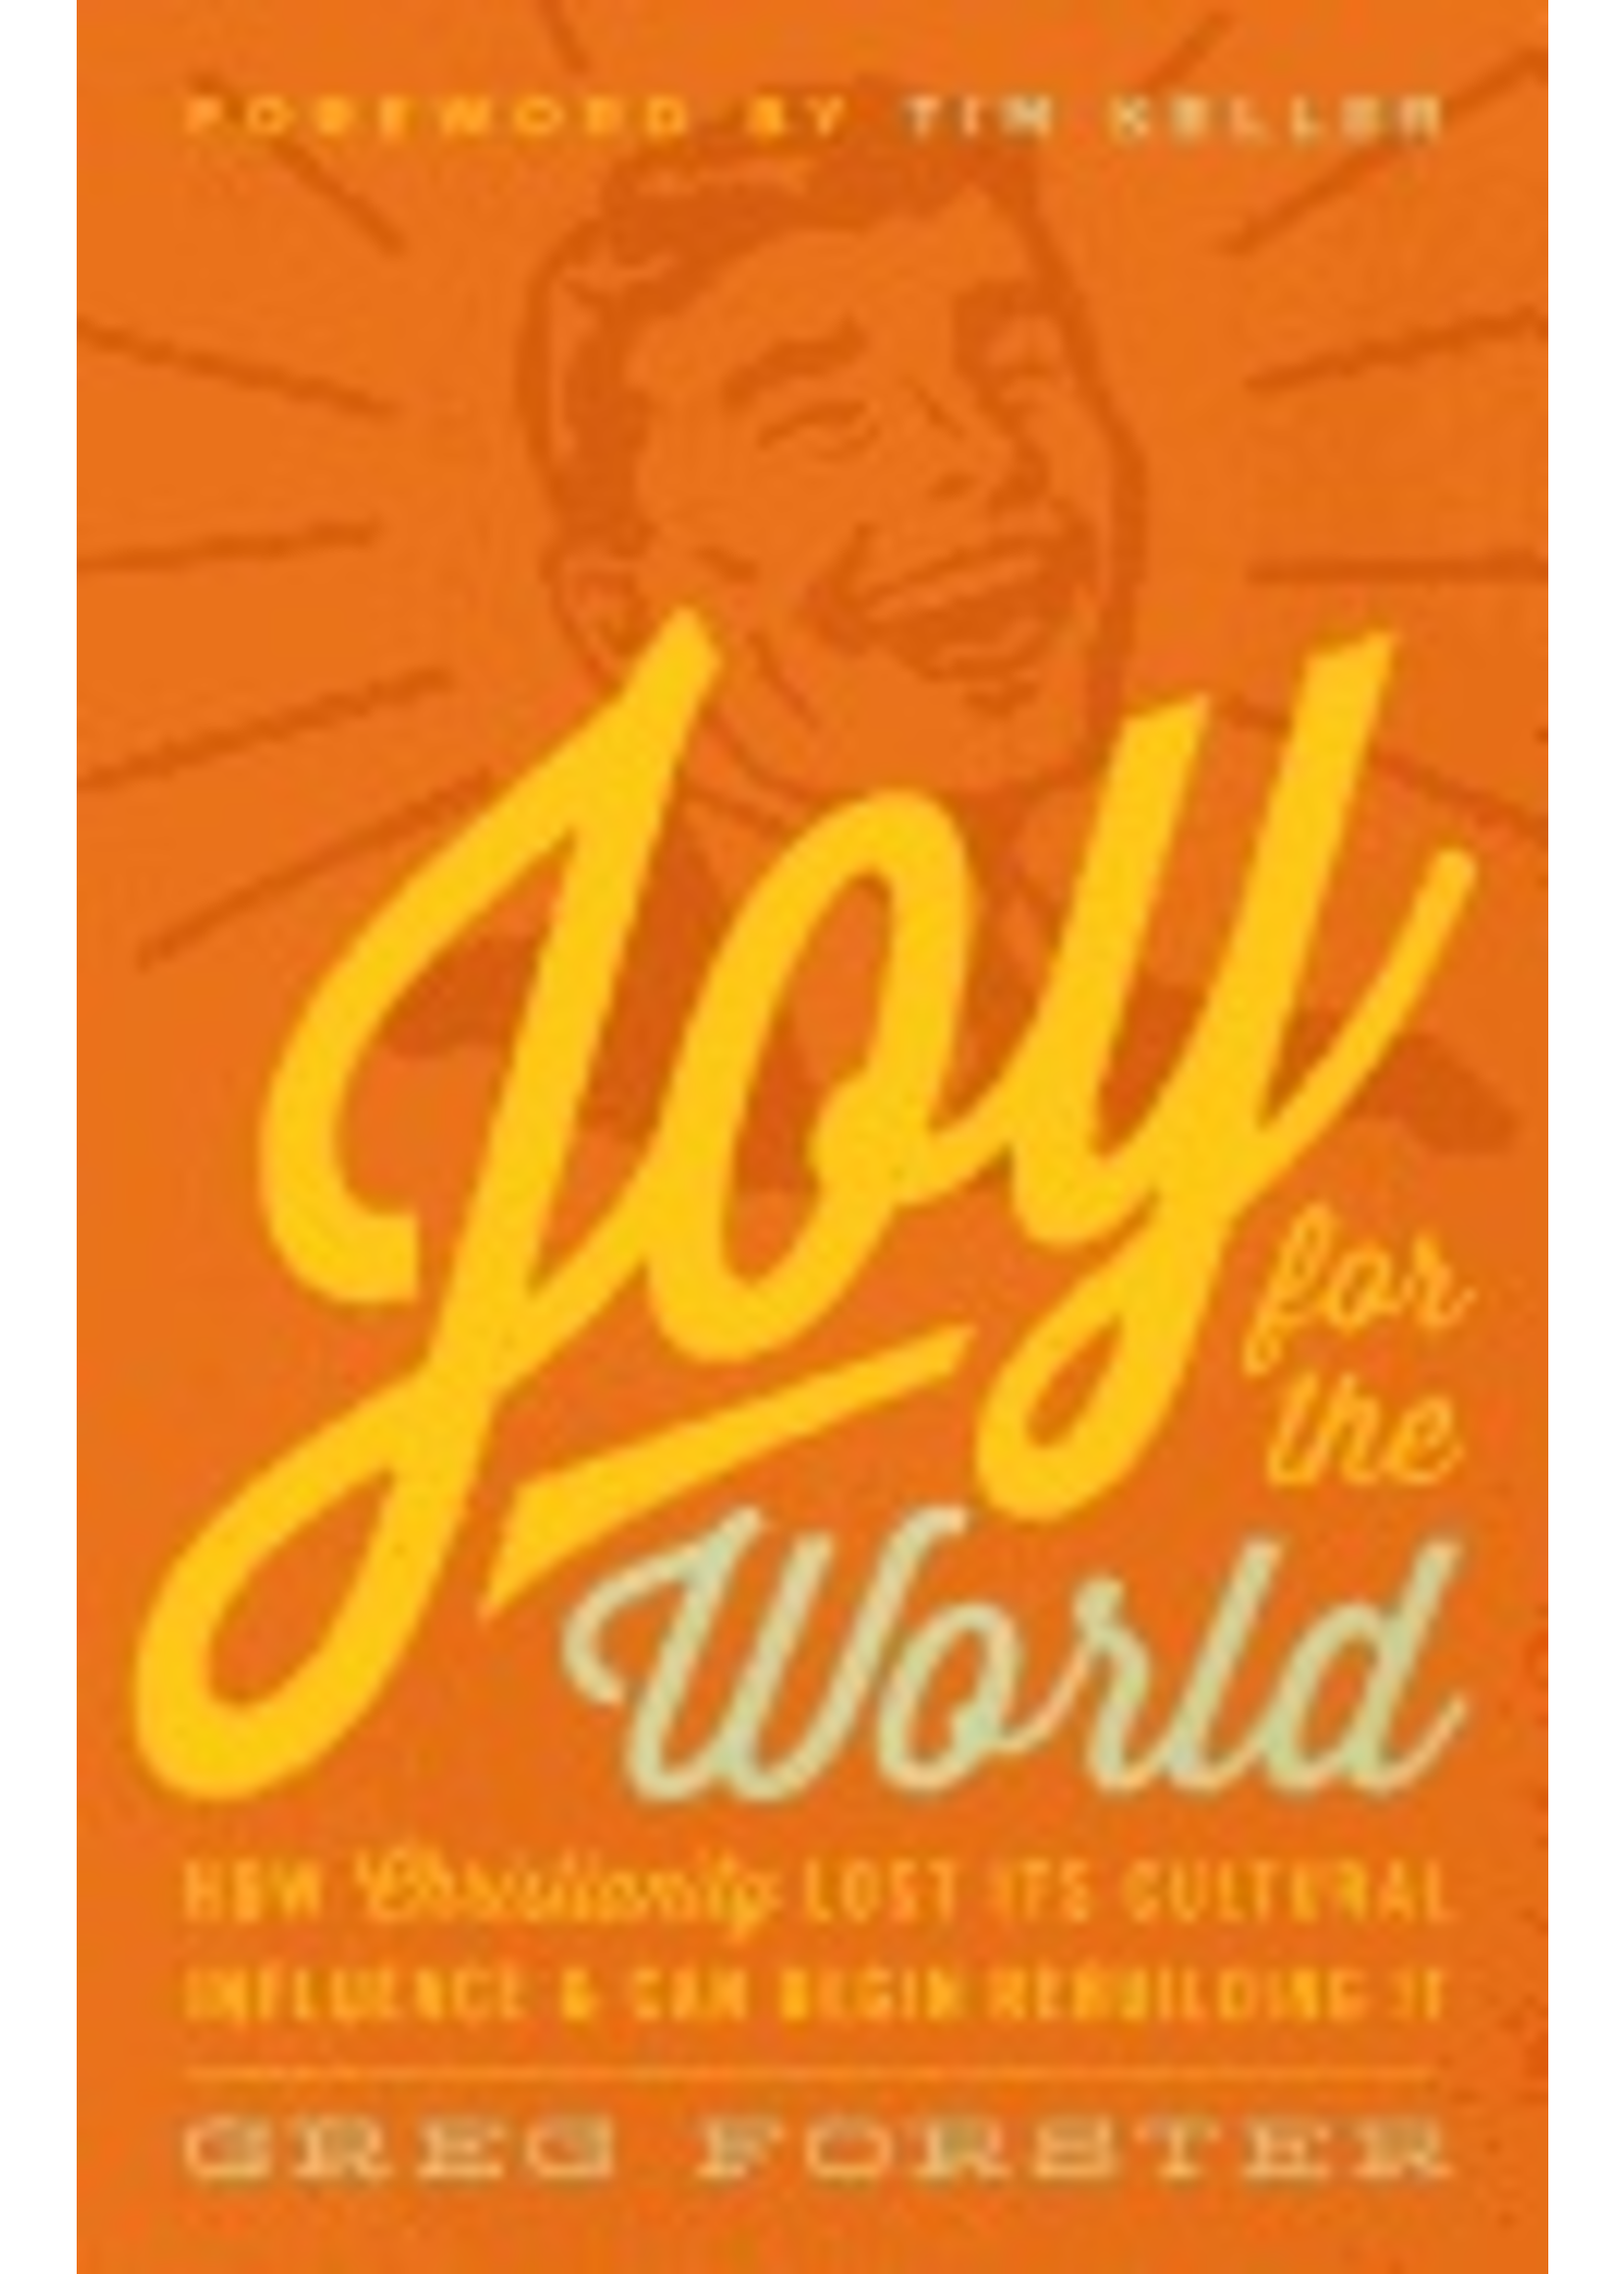 archived JOY FOR THE WORLD